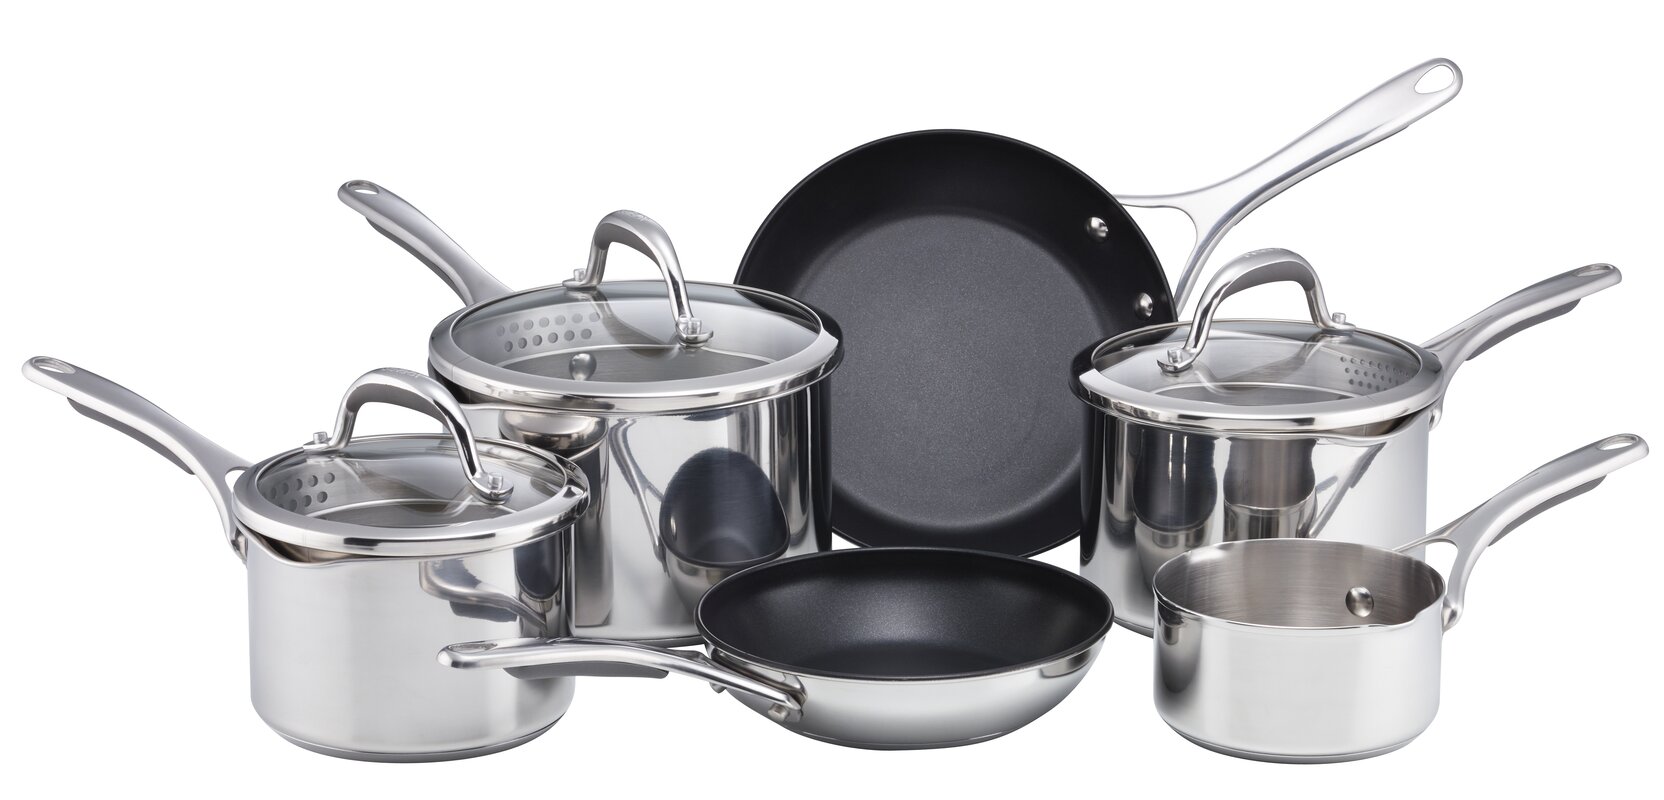 meyer pots and pans review